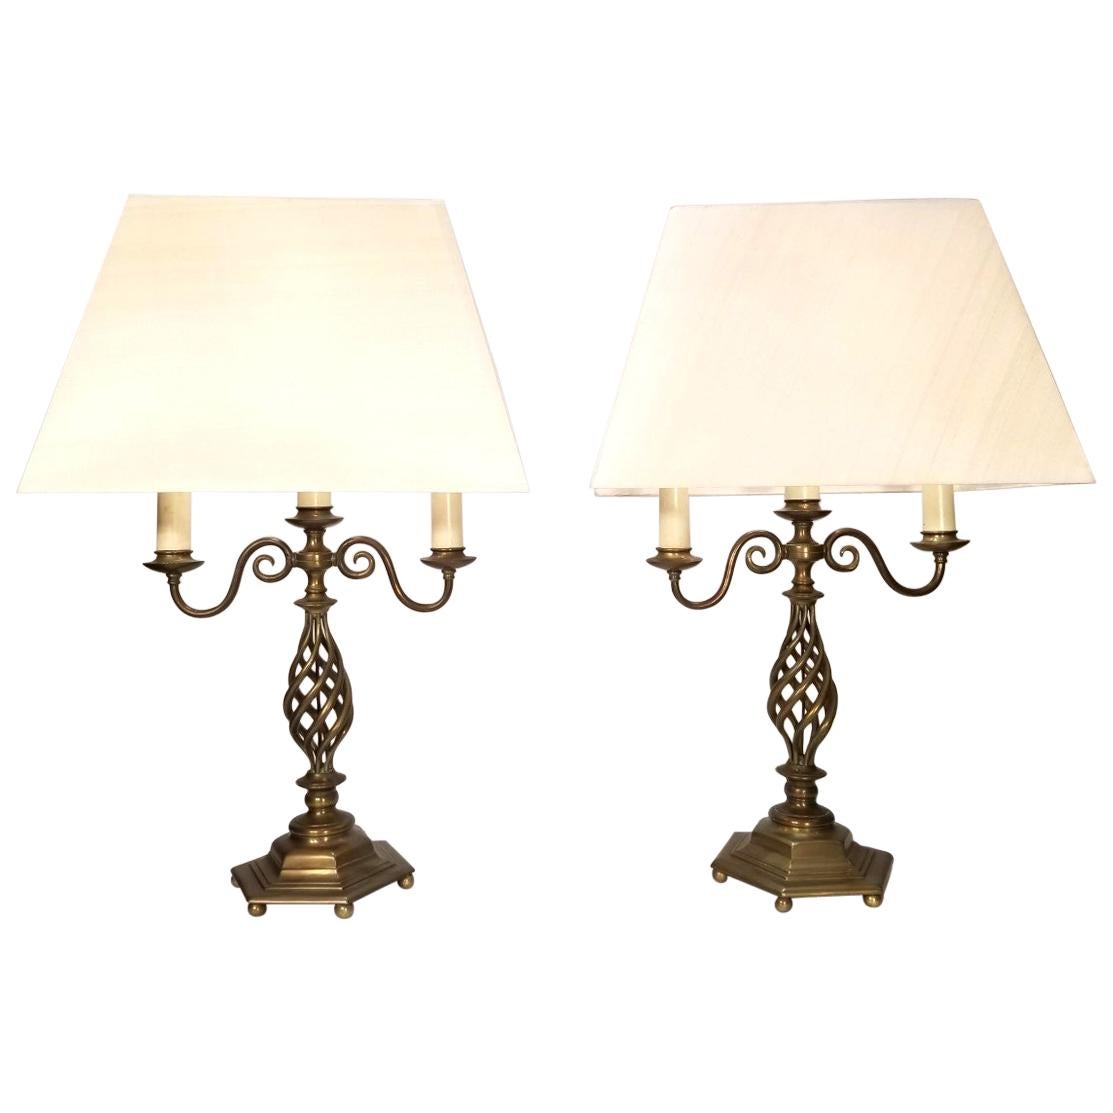 Pair of Early 20th Century English Brass Barley Twist Candelabra Lamps